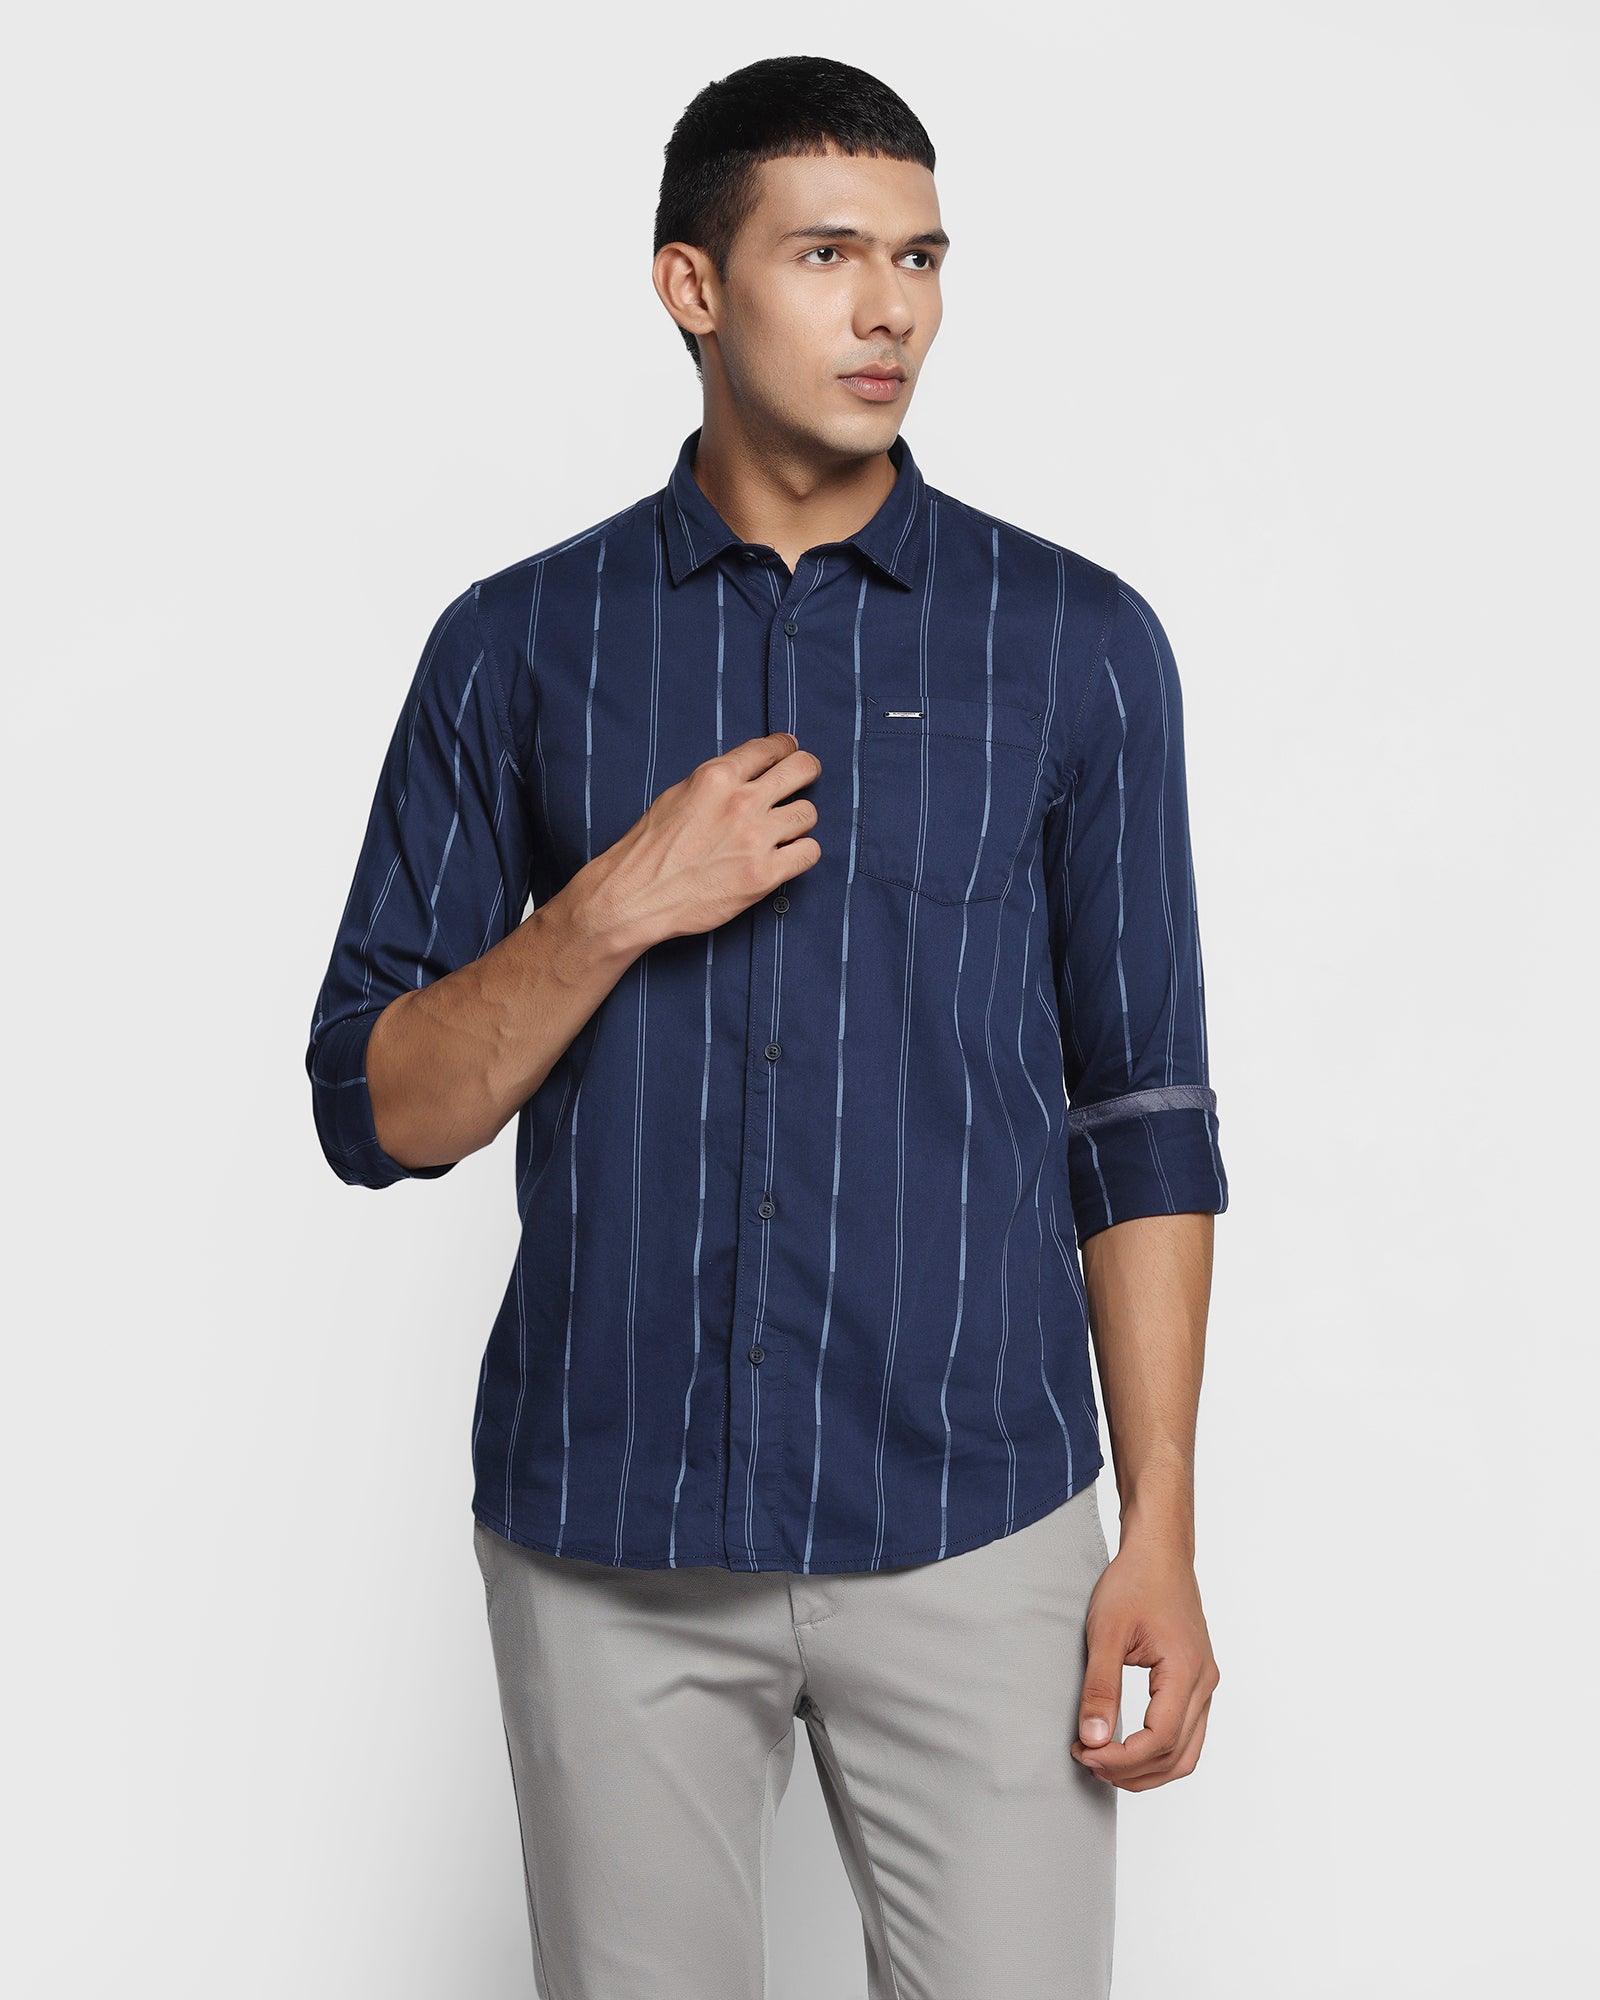 Casual Navy Striped Shirt - Lincon